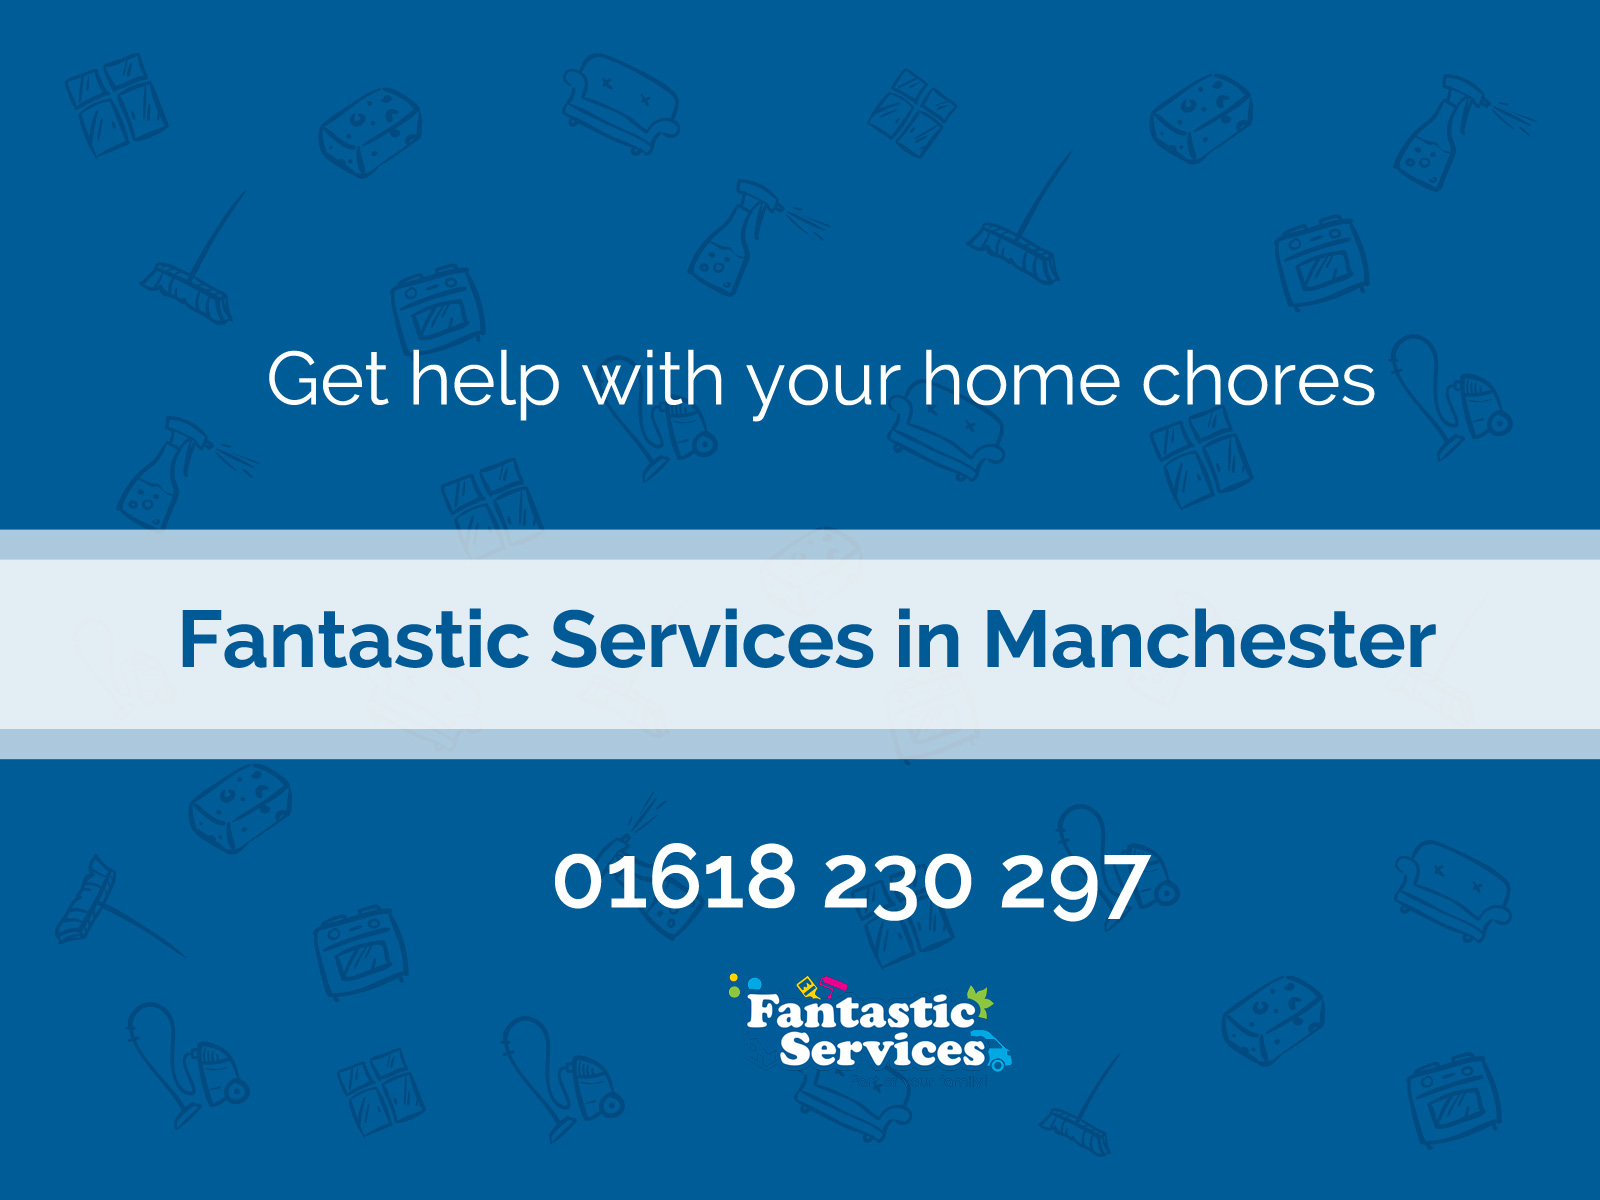 Logo of Fantastic Services in Manchester